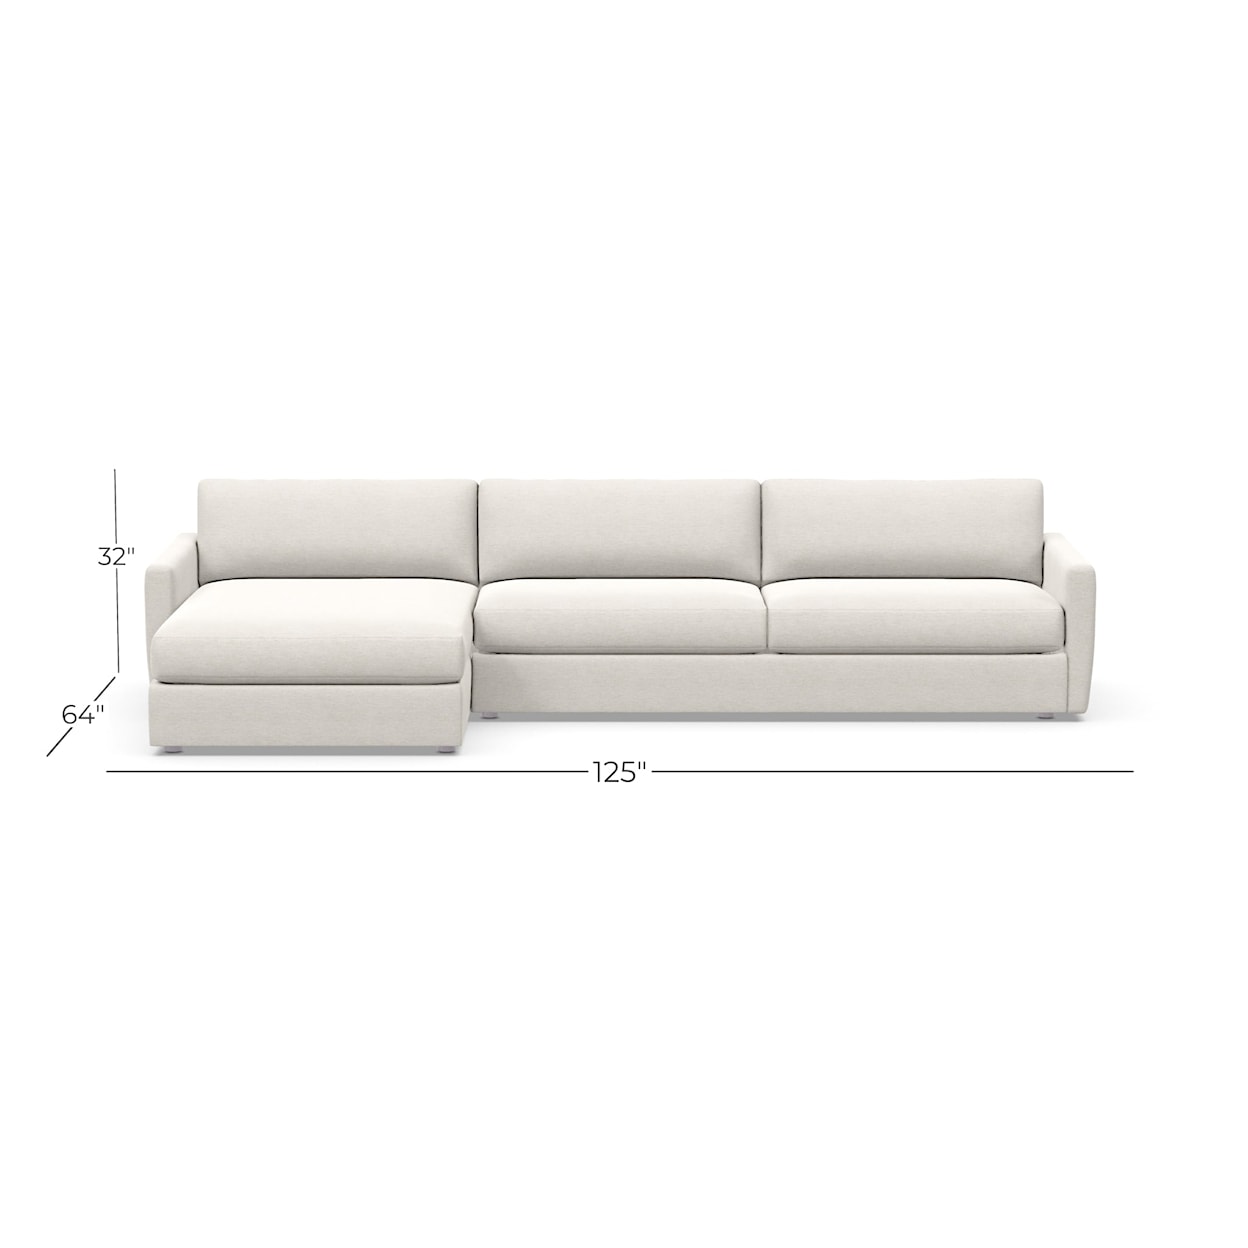 American Leather Carmet 2-Piece Sectional